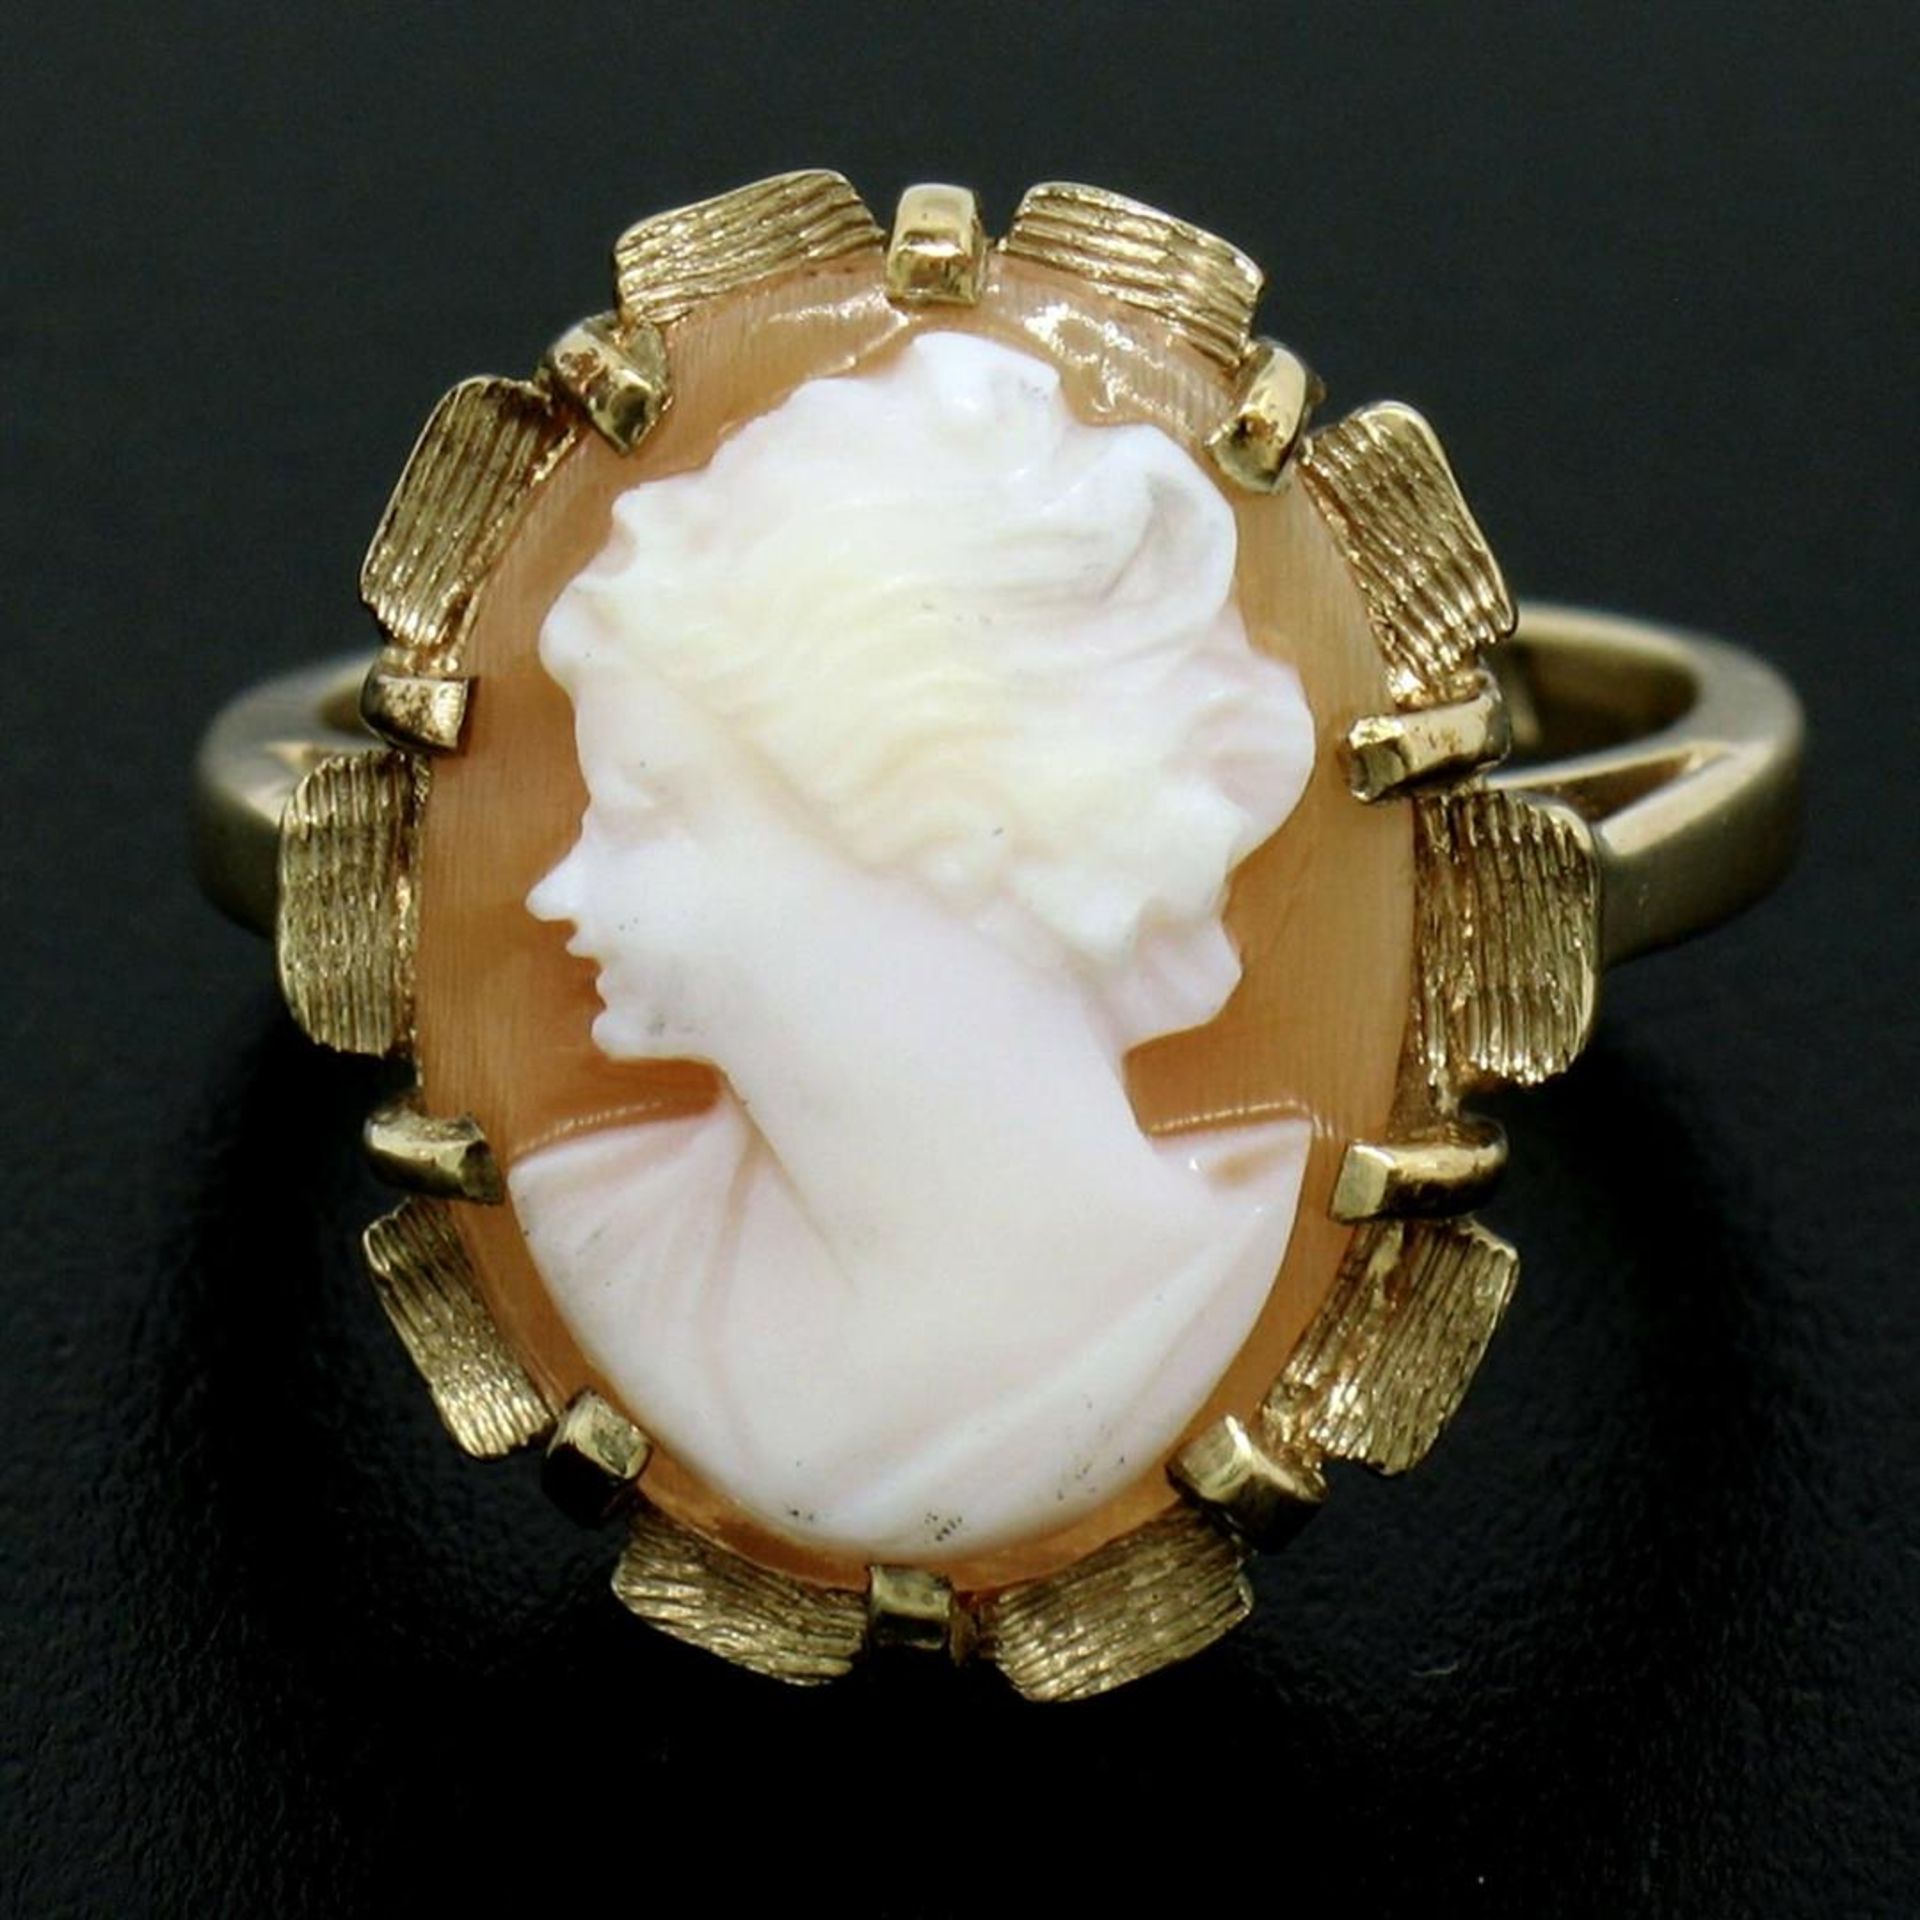 Vintage 14k Yellow Gold Oval Carved Shell Cameo Ring w/ Brushed Finish Frame - Image 2 of 8